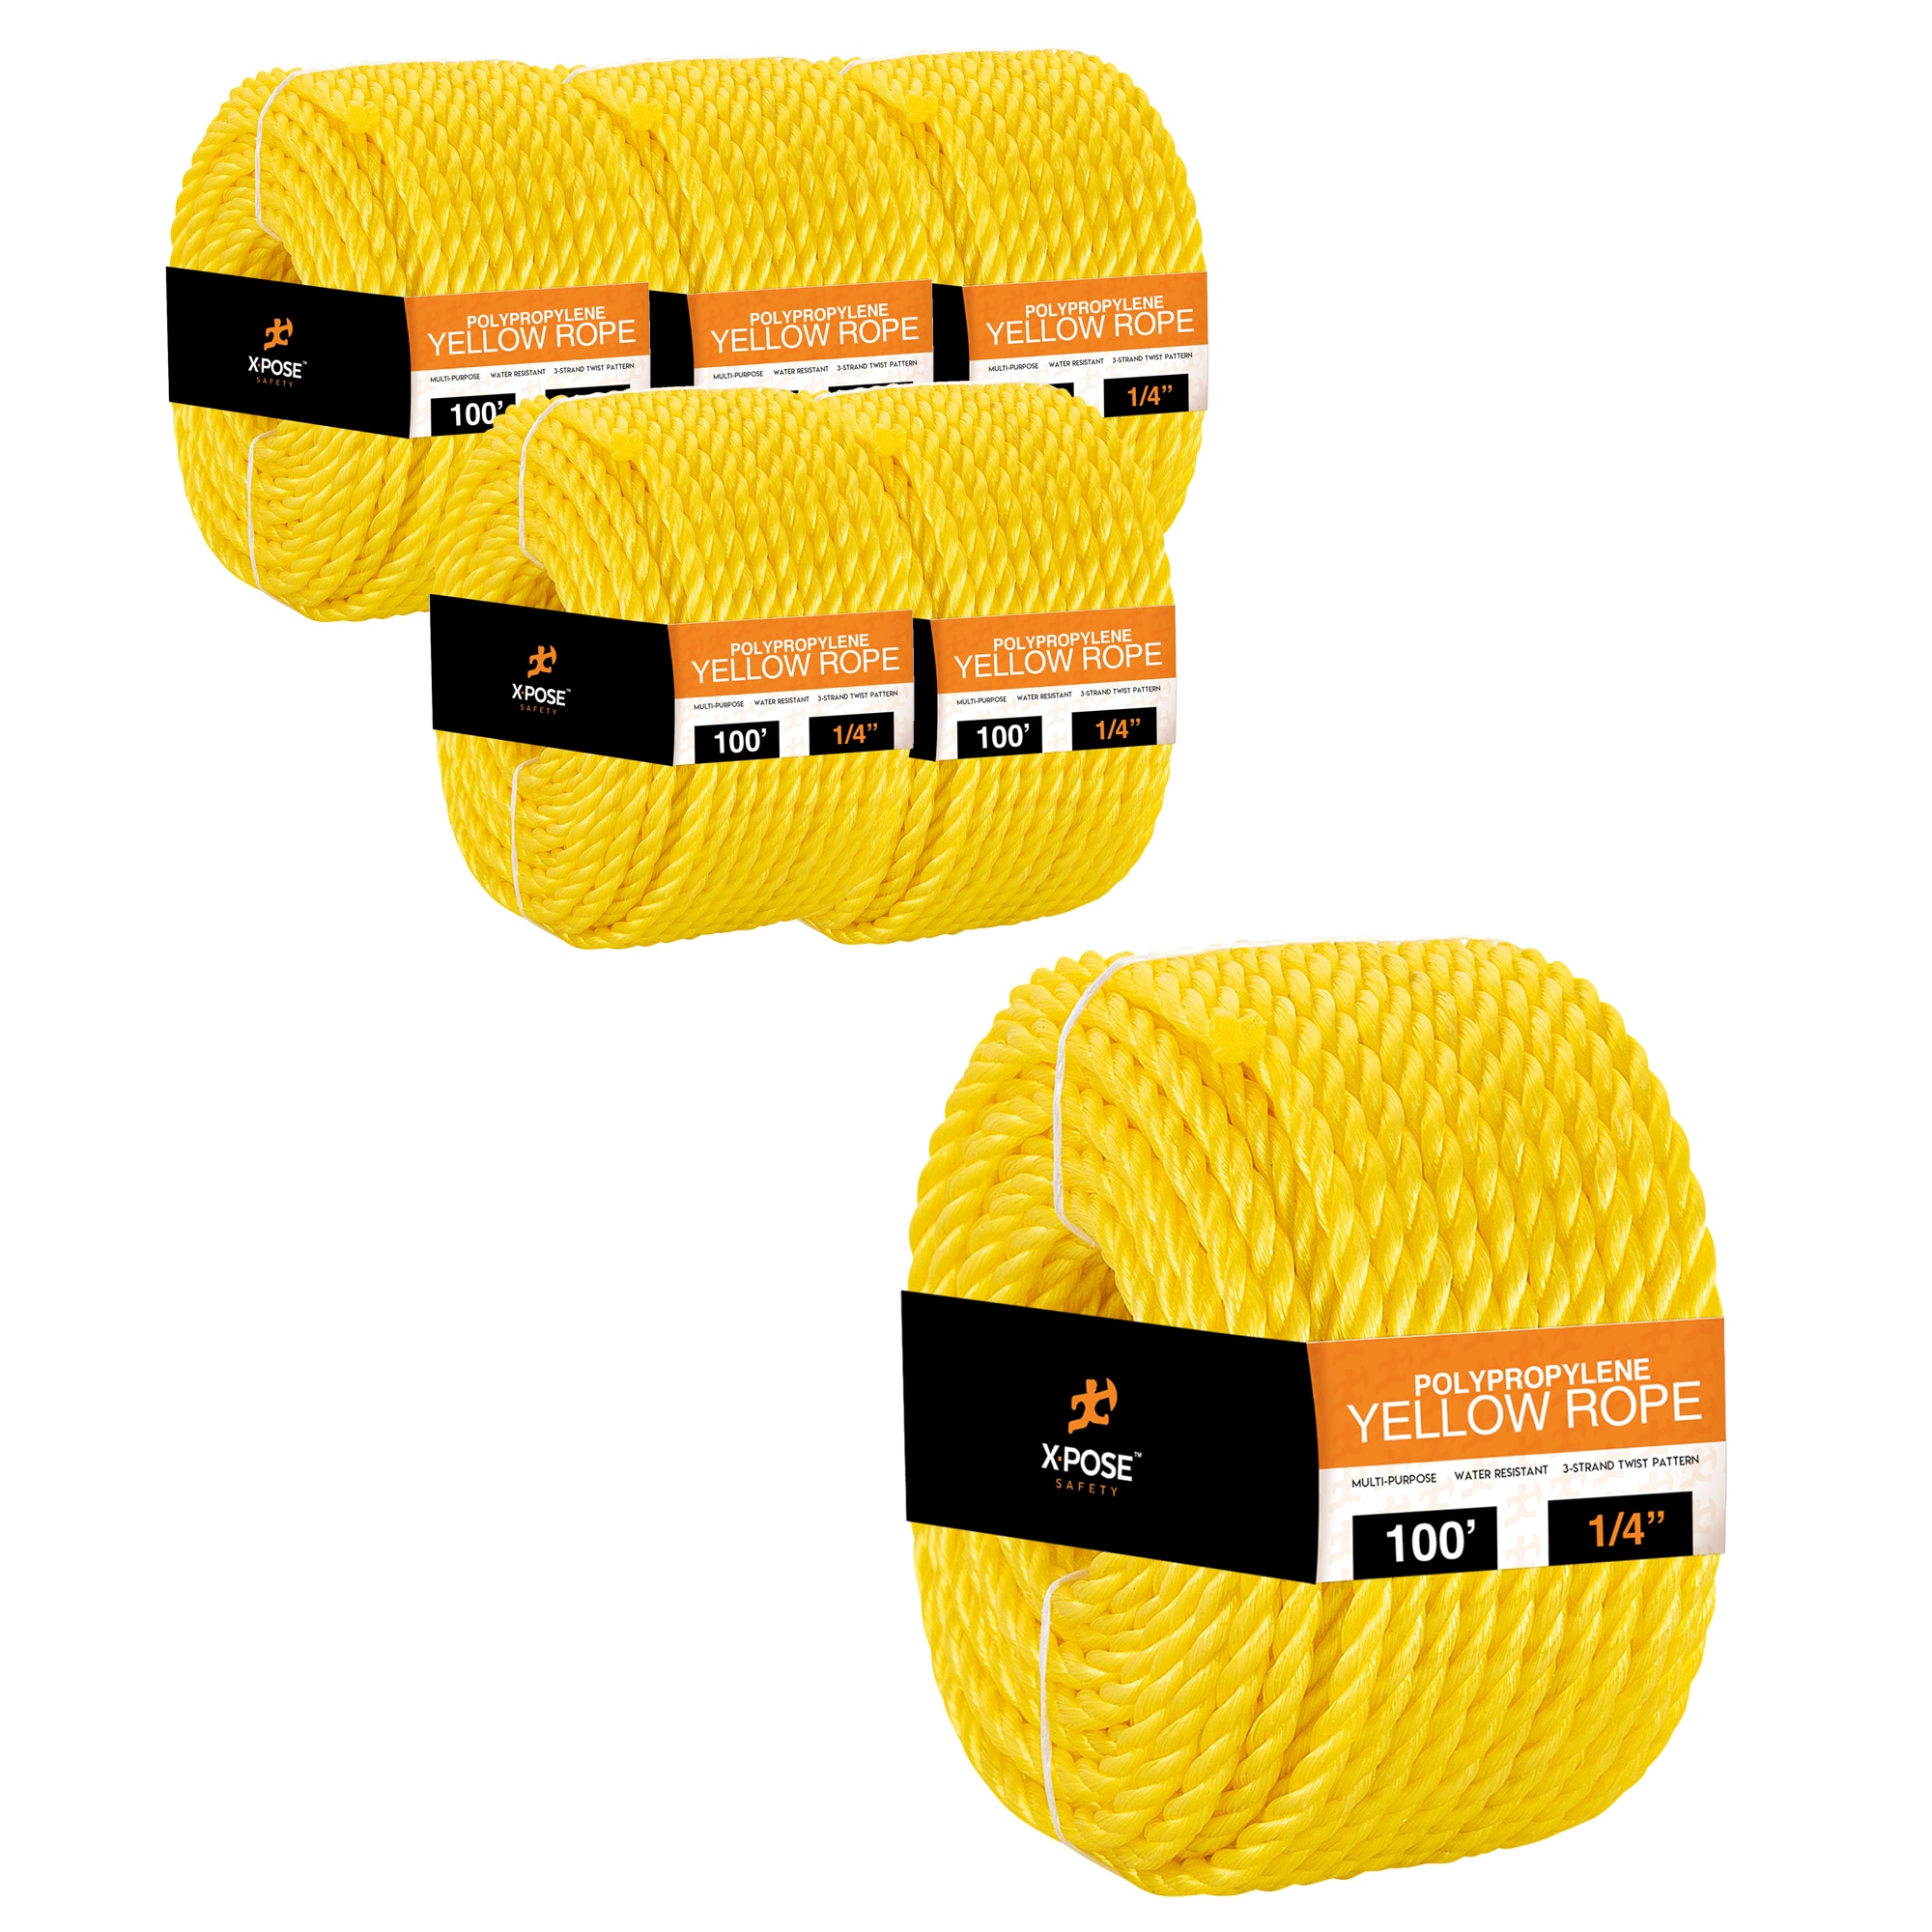 Xpose Safety 0.25-in x 100-ft Twisted Polypropylene Rope (By-the-Roll) in Yellow | YPR14-100-6-X-S